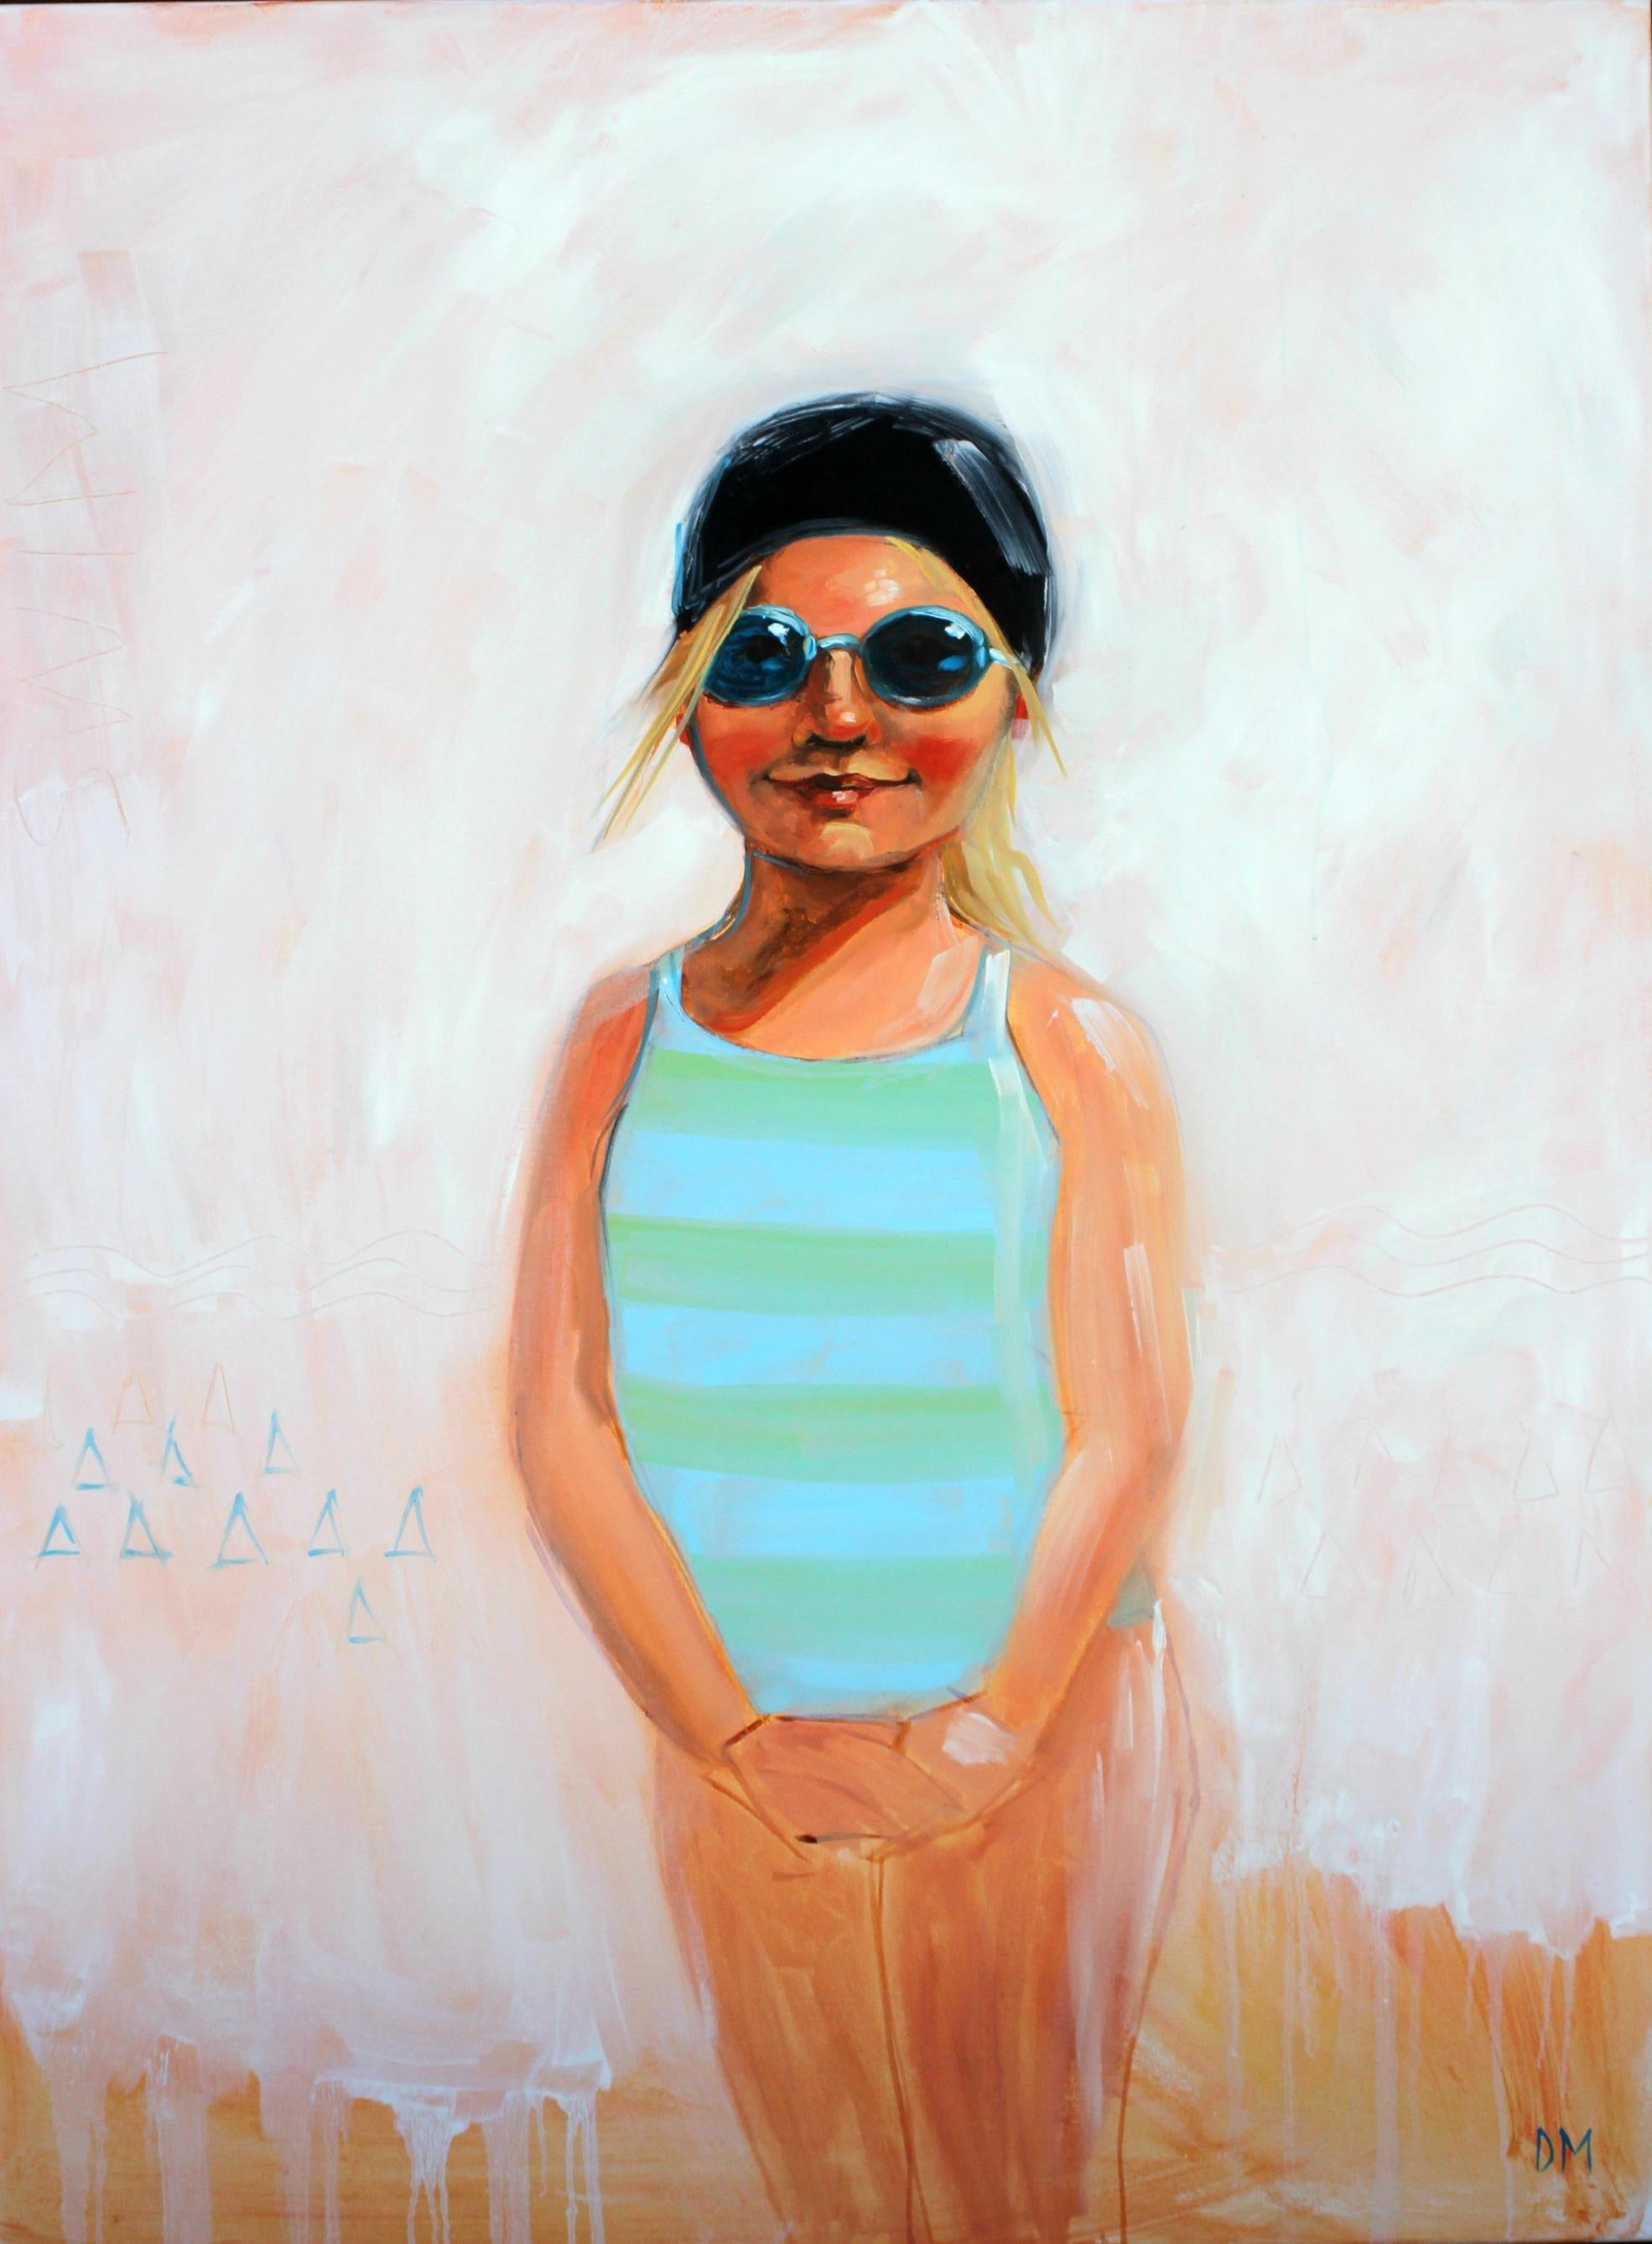 Debbie Miller Figurative Painting - "Summer Blue" Oil painting of a girl in a blue swimsuit with black cap and pink